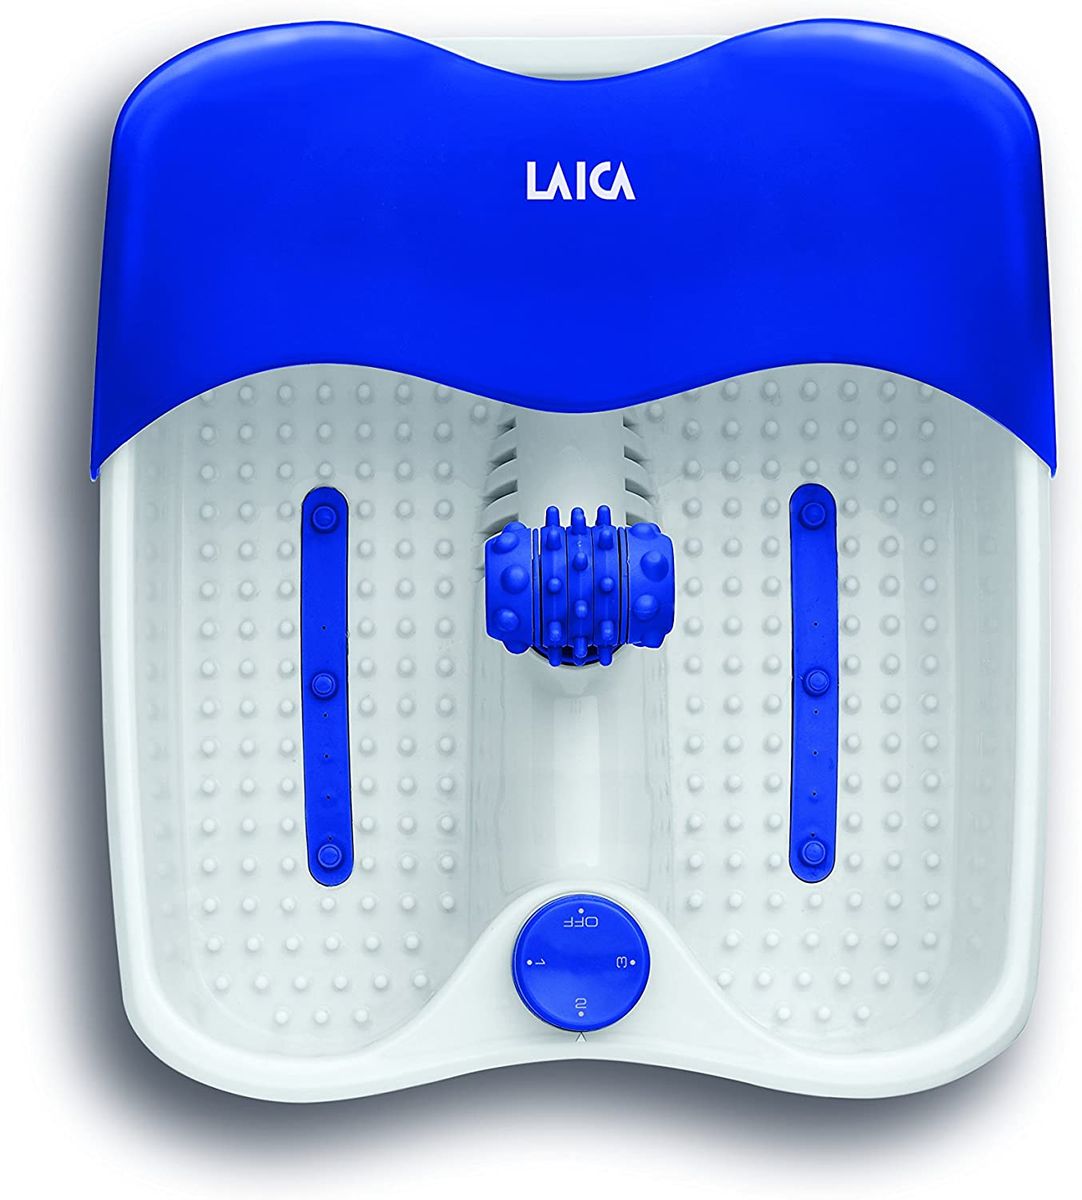 Laica foot spa for a relaxing foot massage